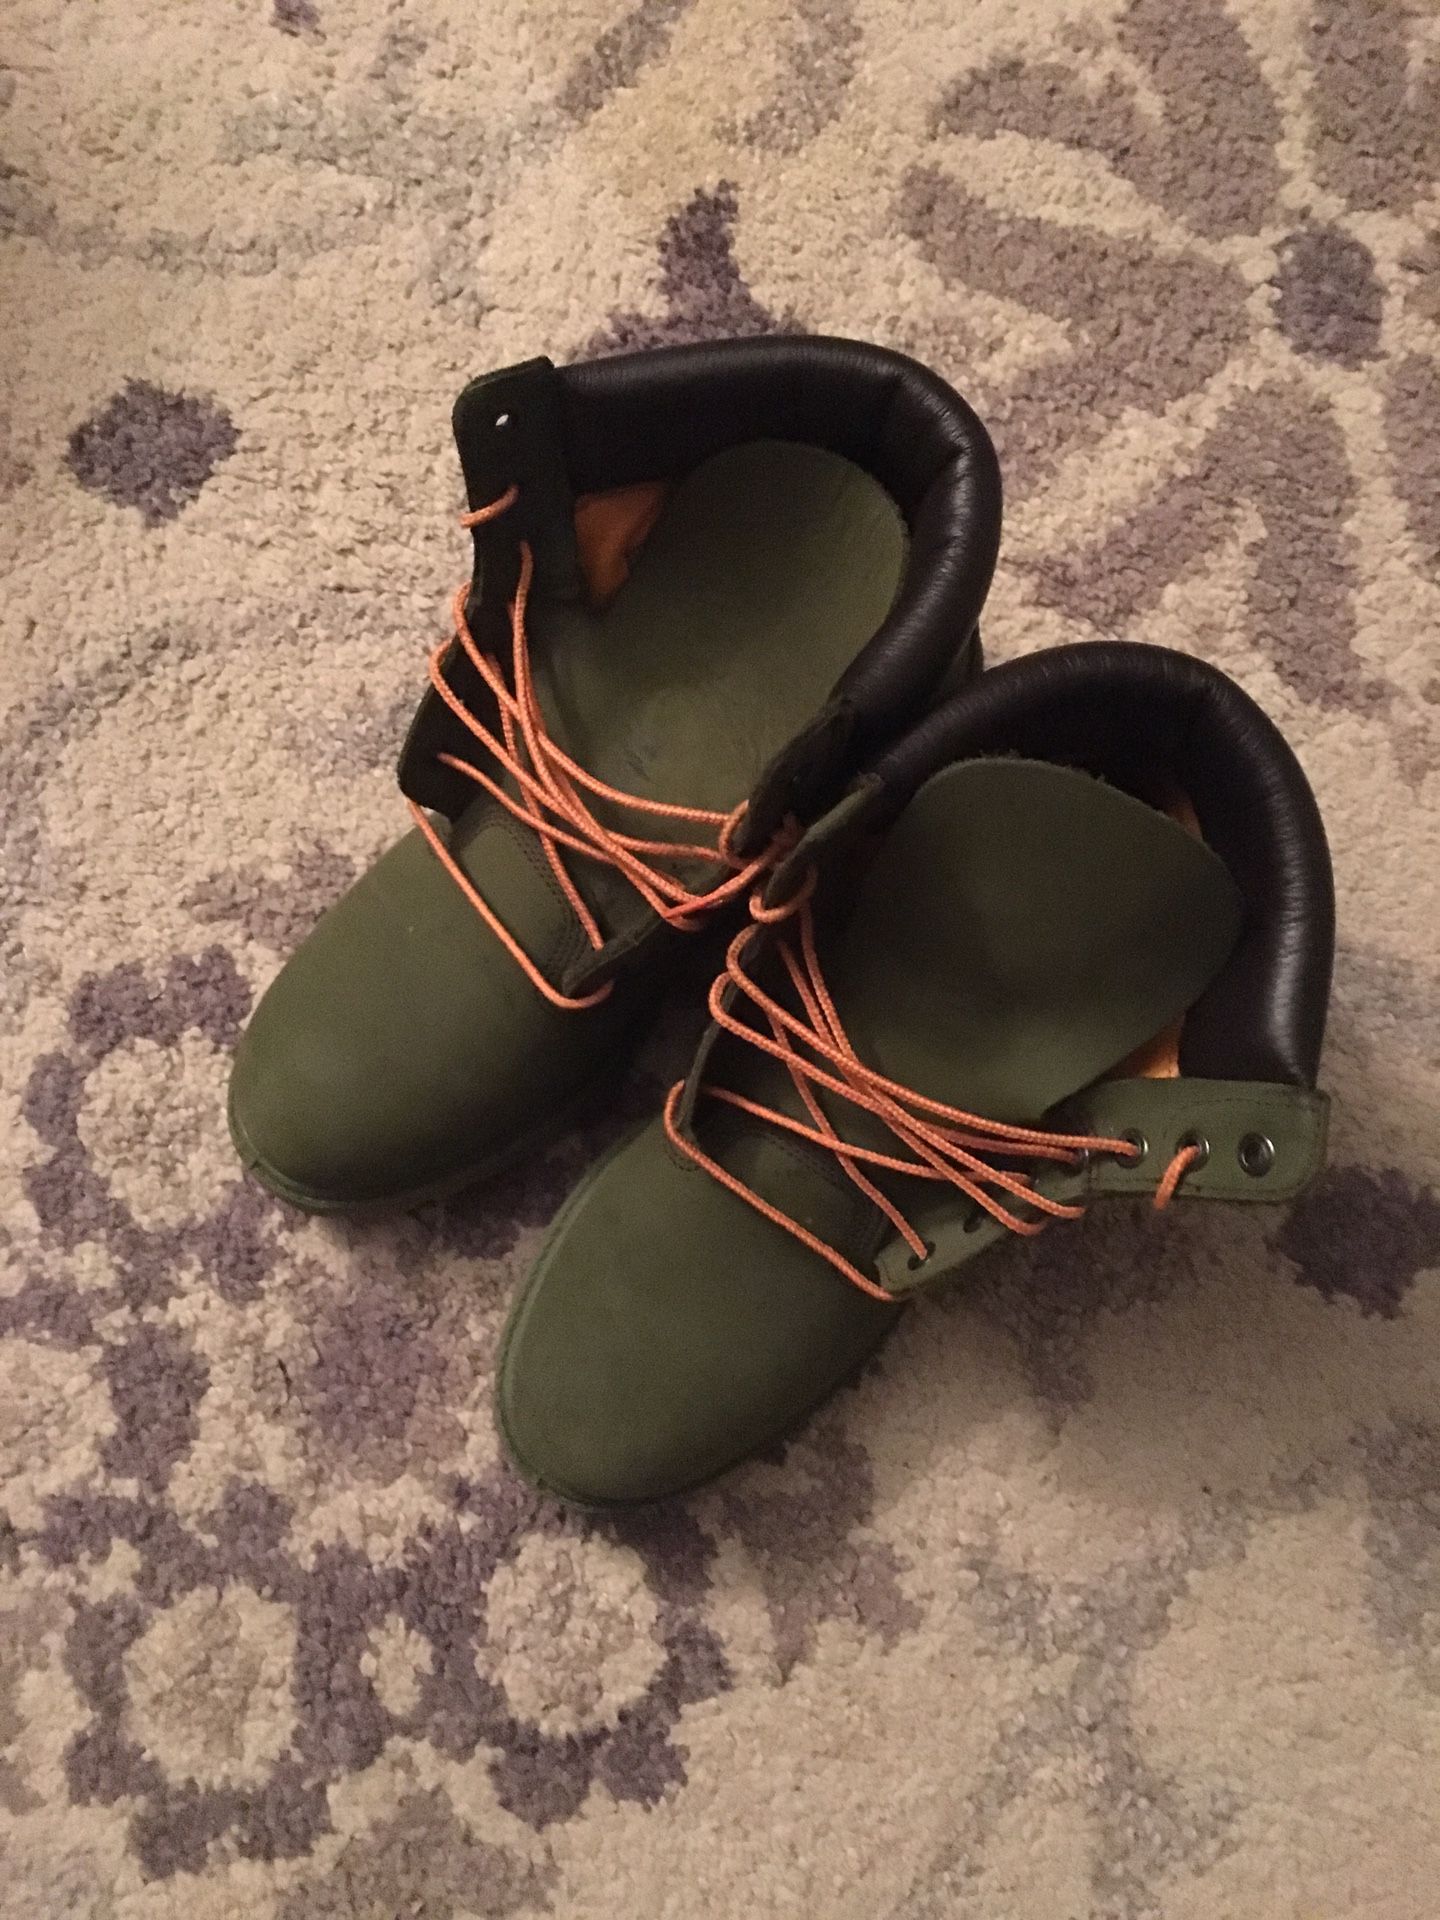 Timberlands Size 9, 8/10 condition